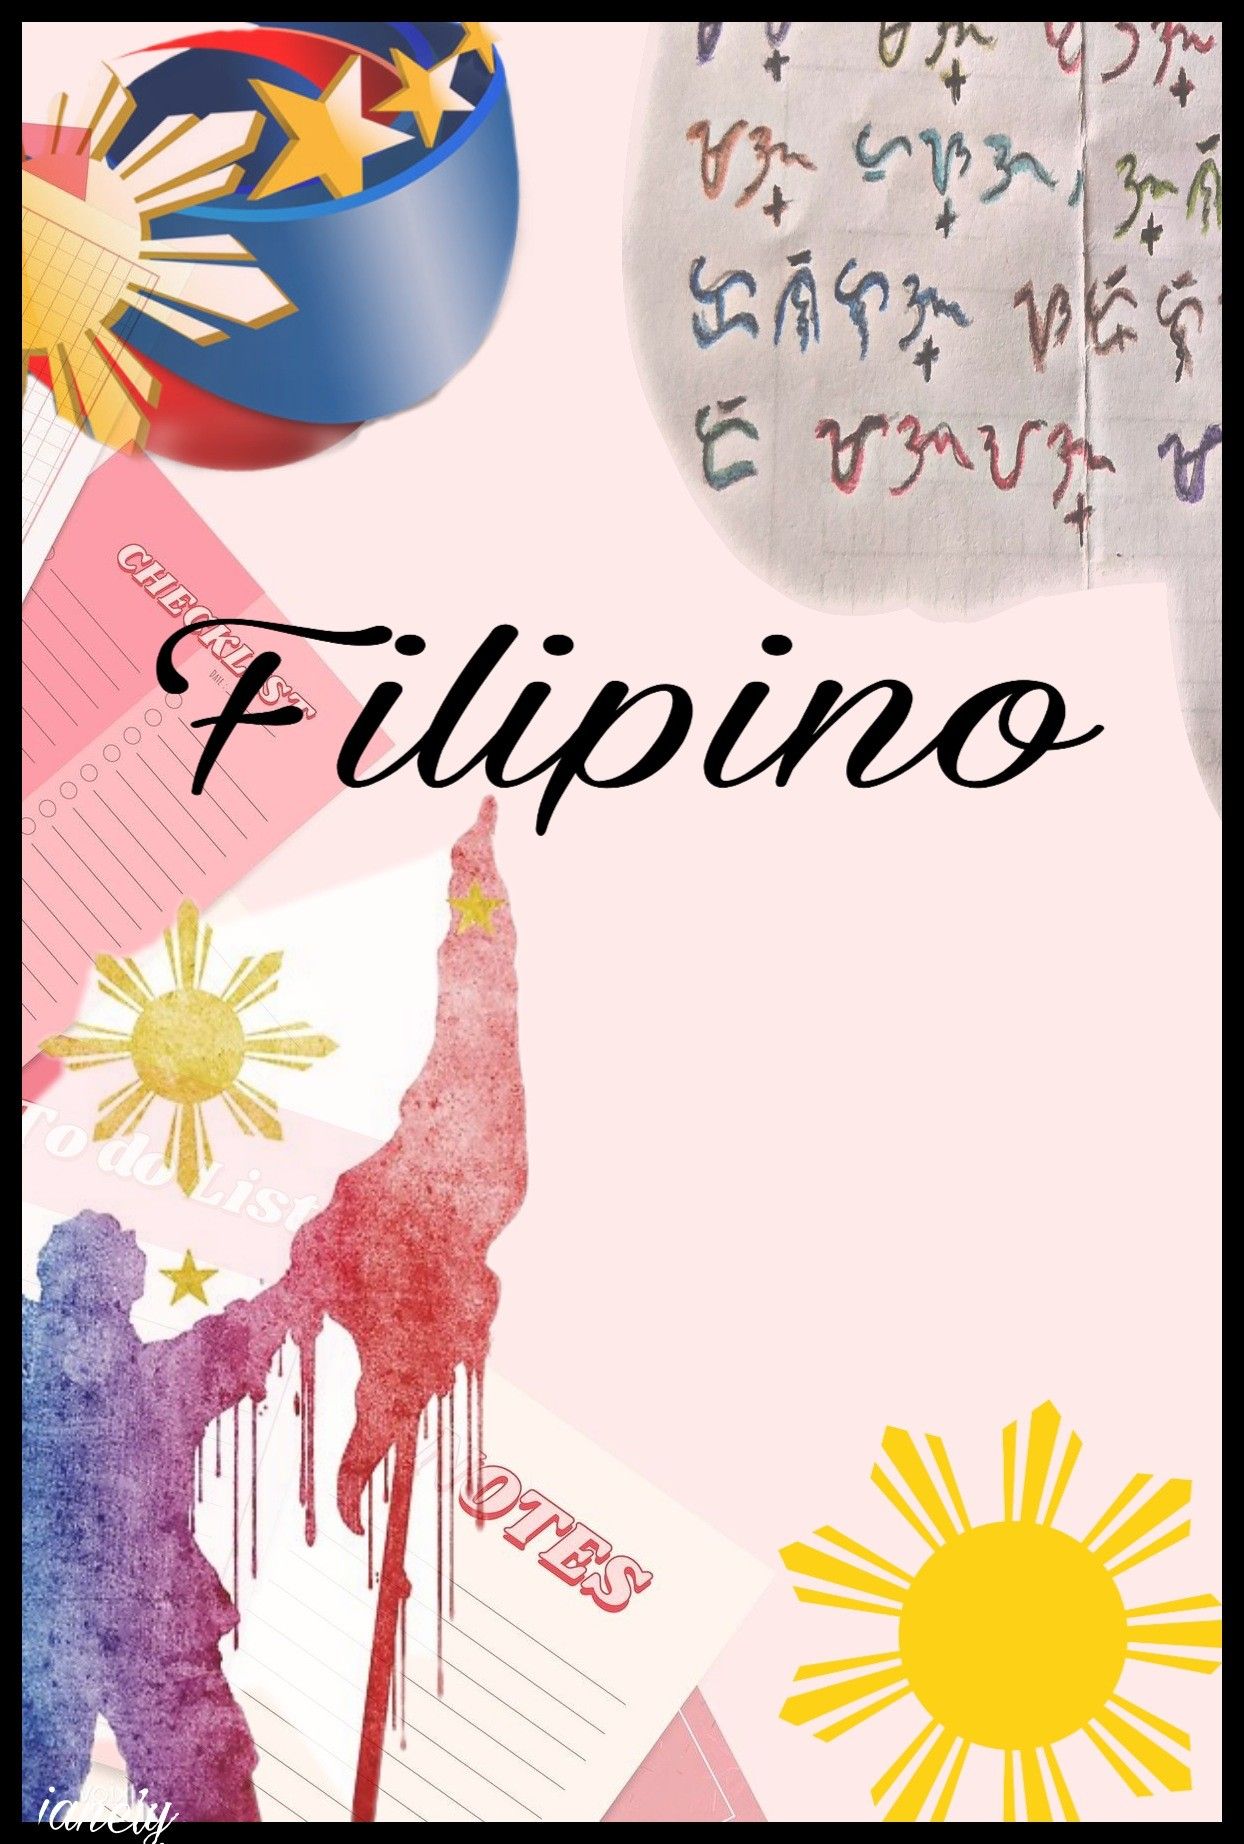 FILIPINO (from Regional Course Packages)